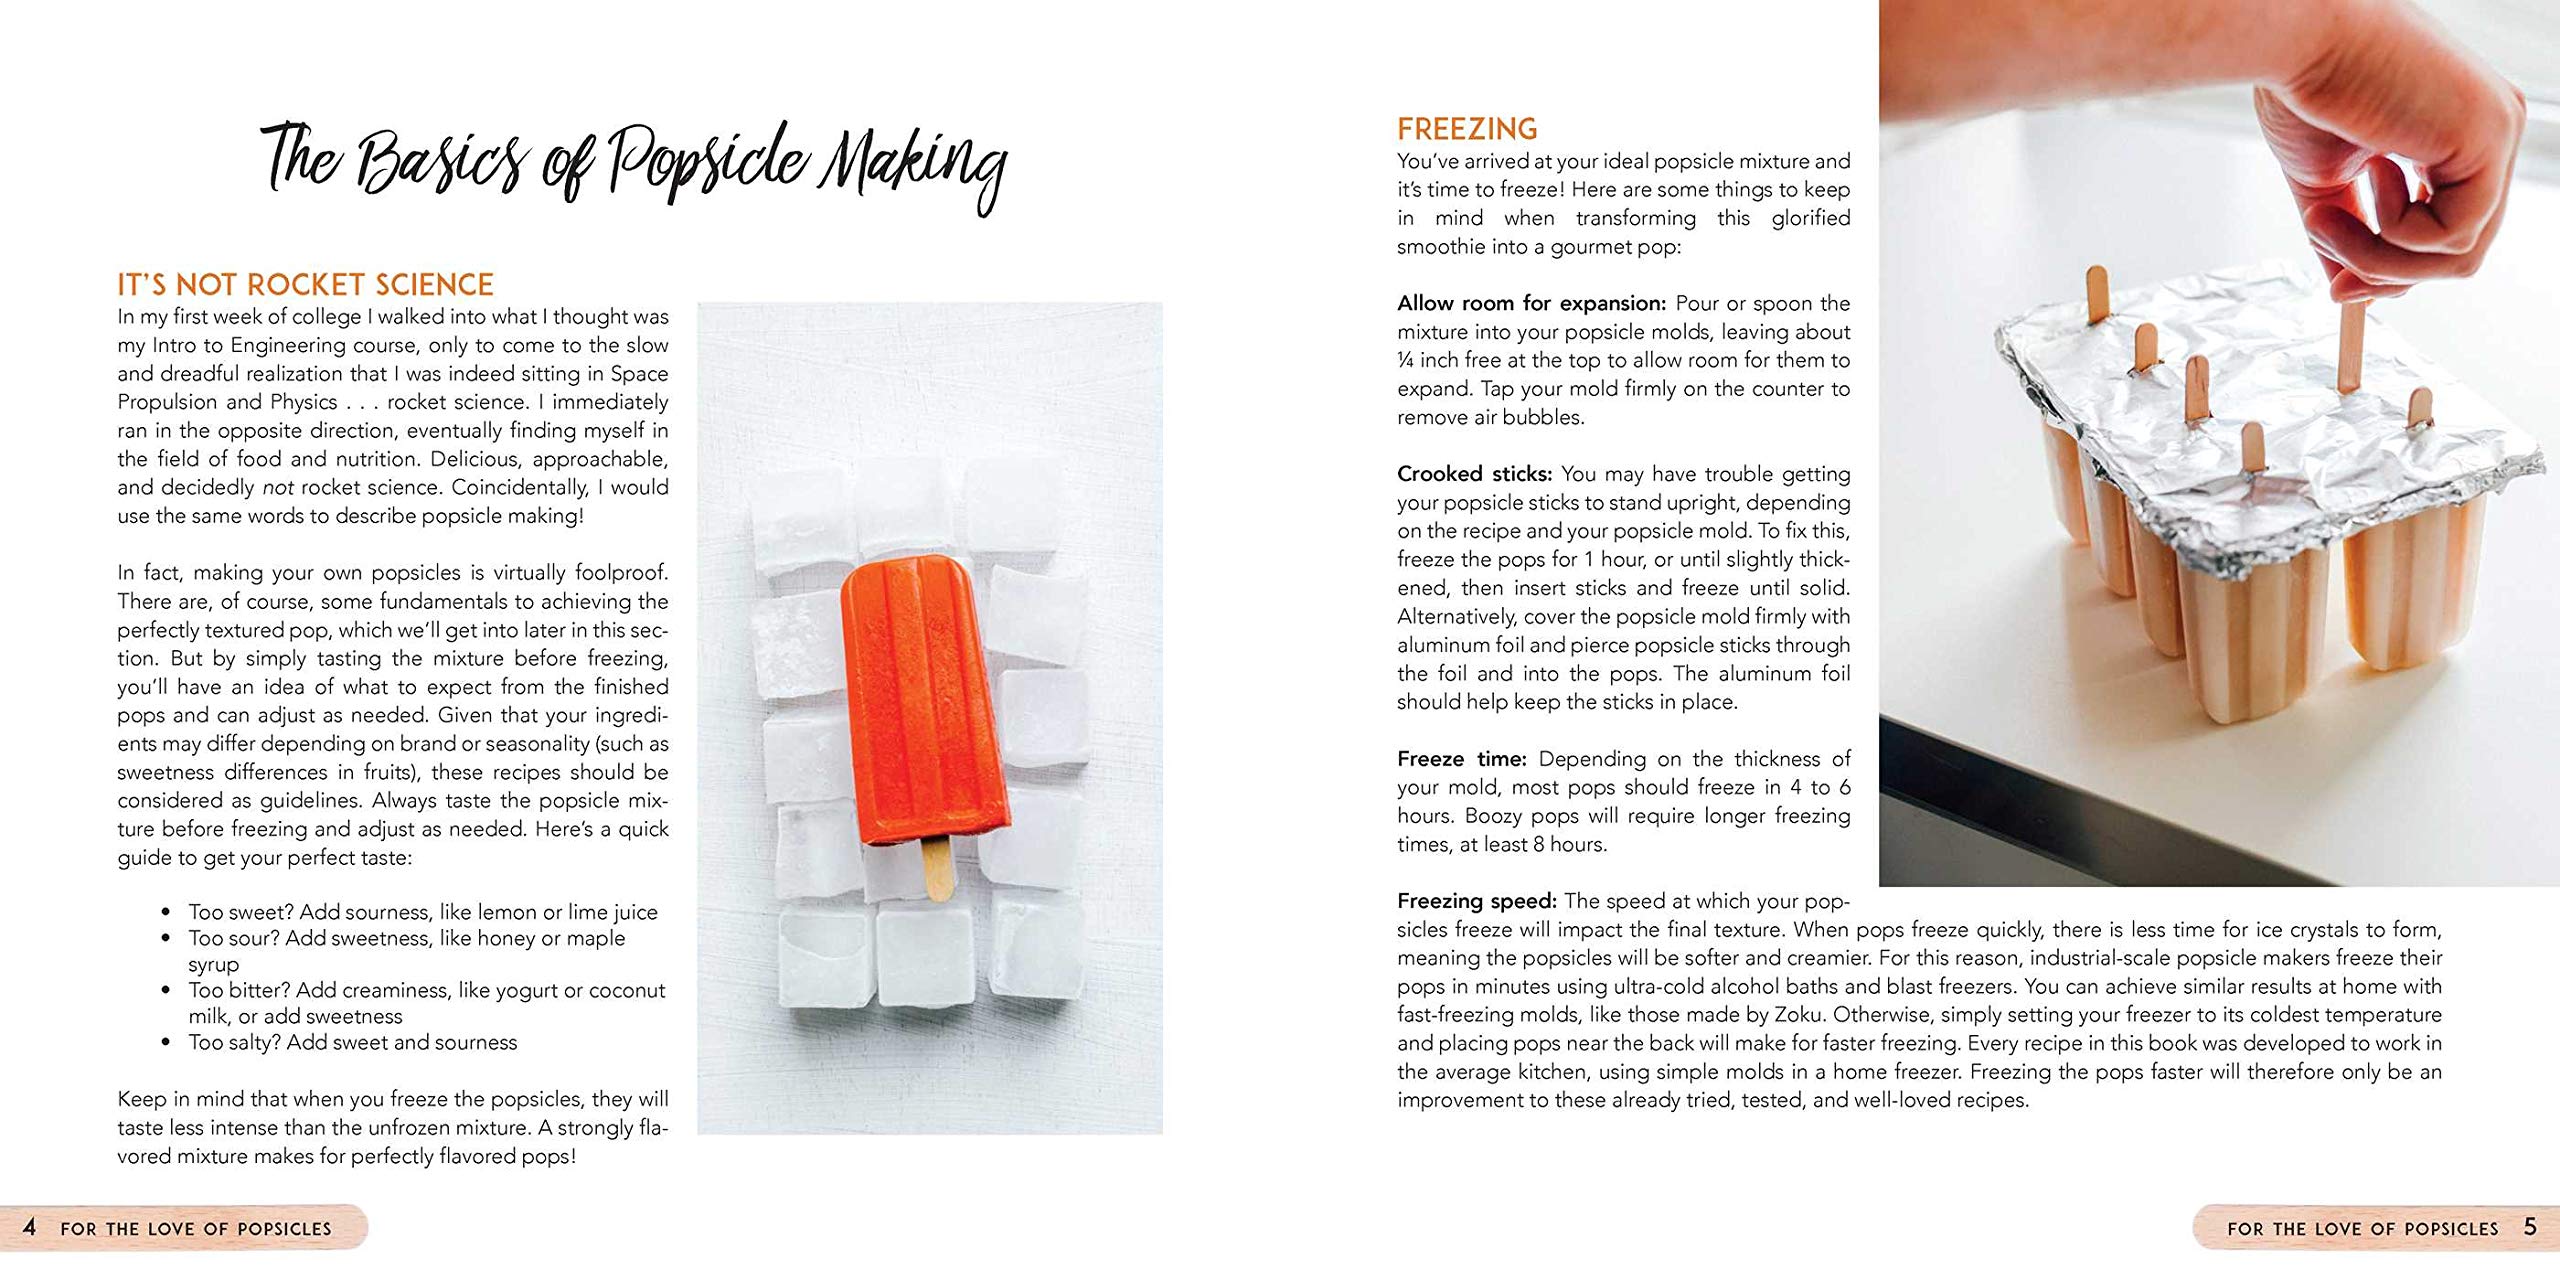 For the Love of Popsicles: Naturally Delicious Icy Sweet Summer Treats from A–Z